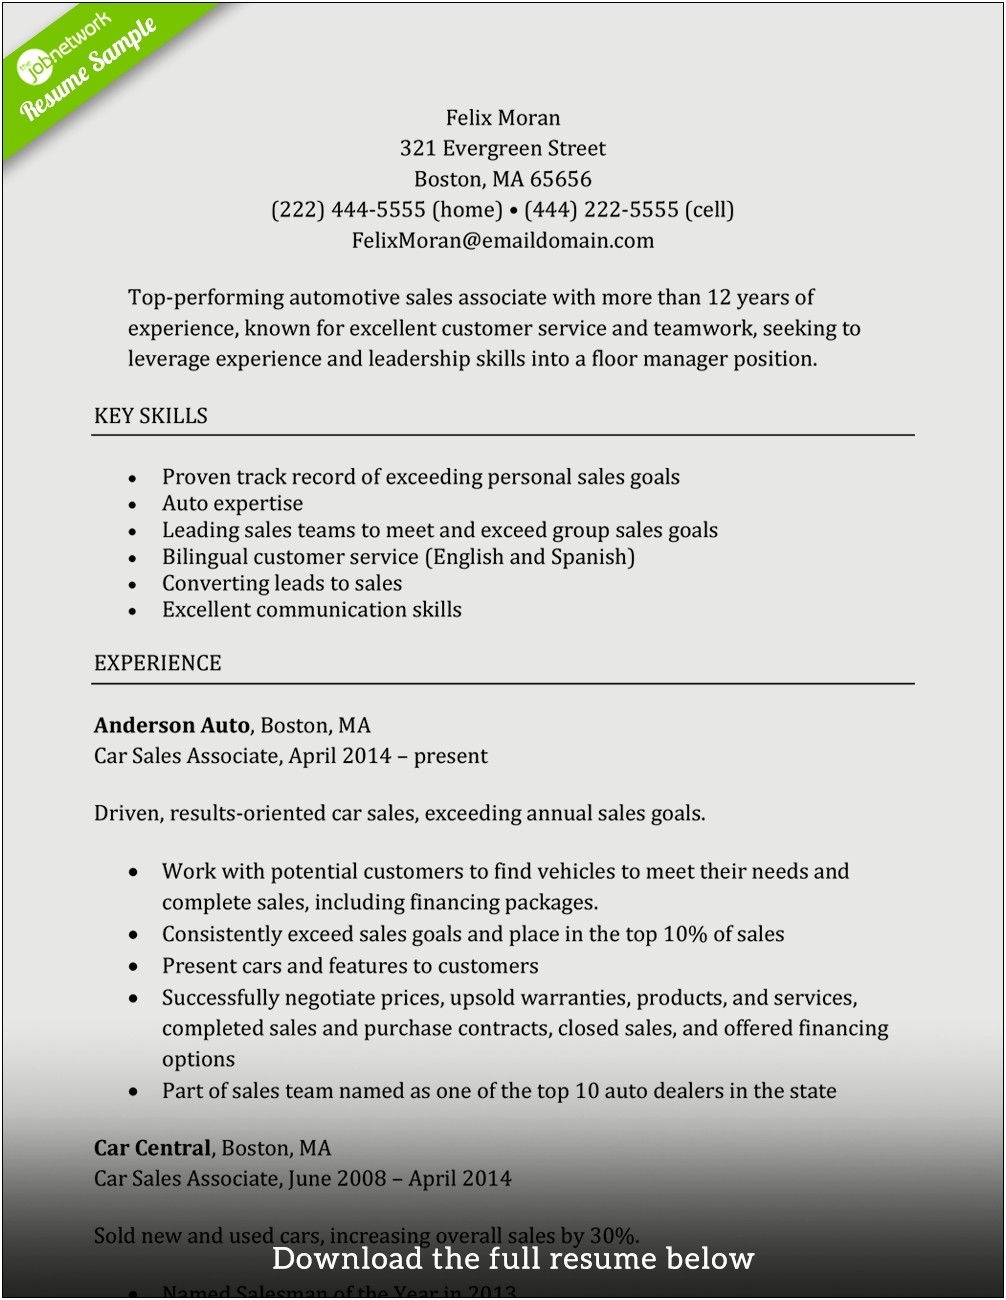 Resume Example Of Manager Without Experience